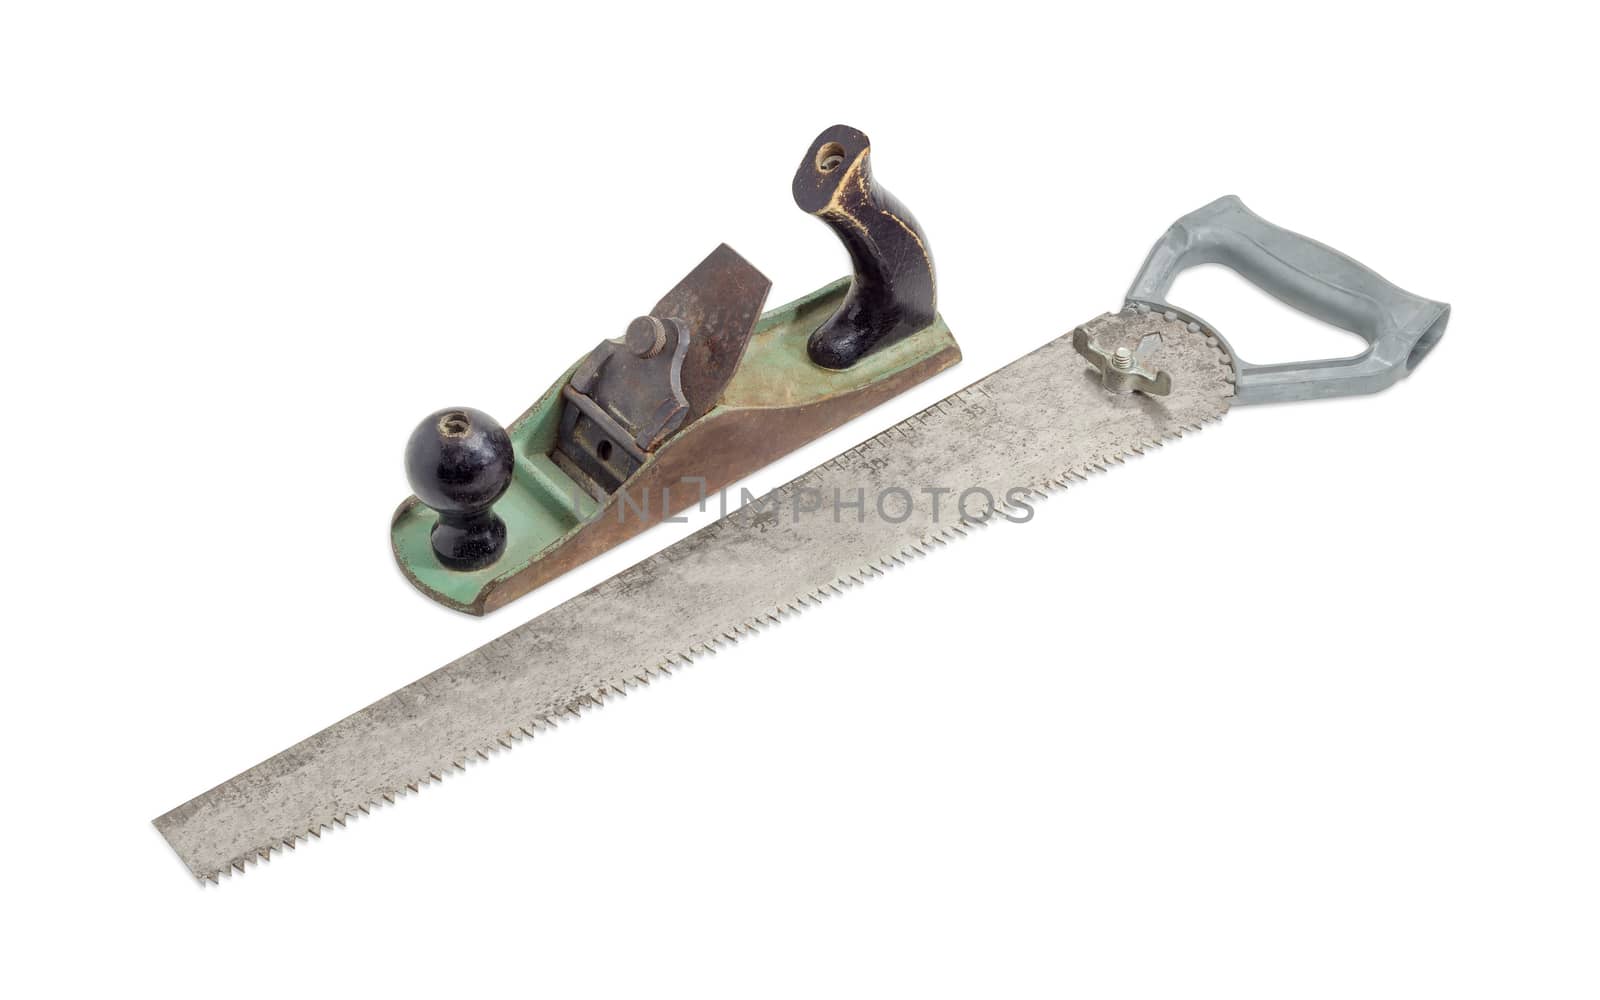 Old metal hand plane with wooden handles and old crosscut hand saw with handle with interchangeable blades and quick-release nut on a white background
